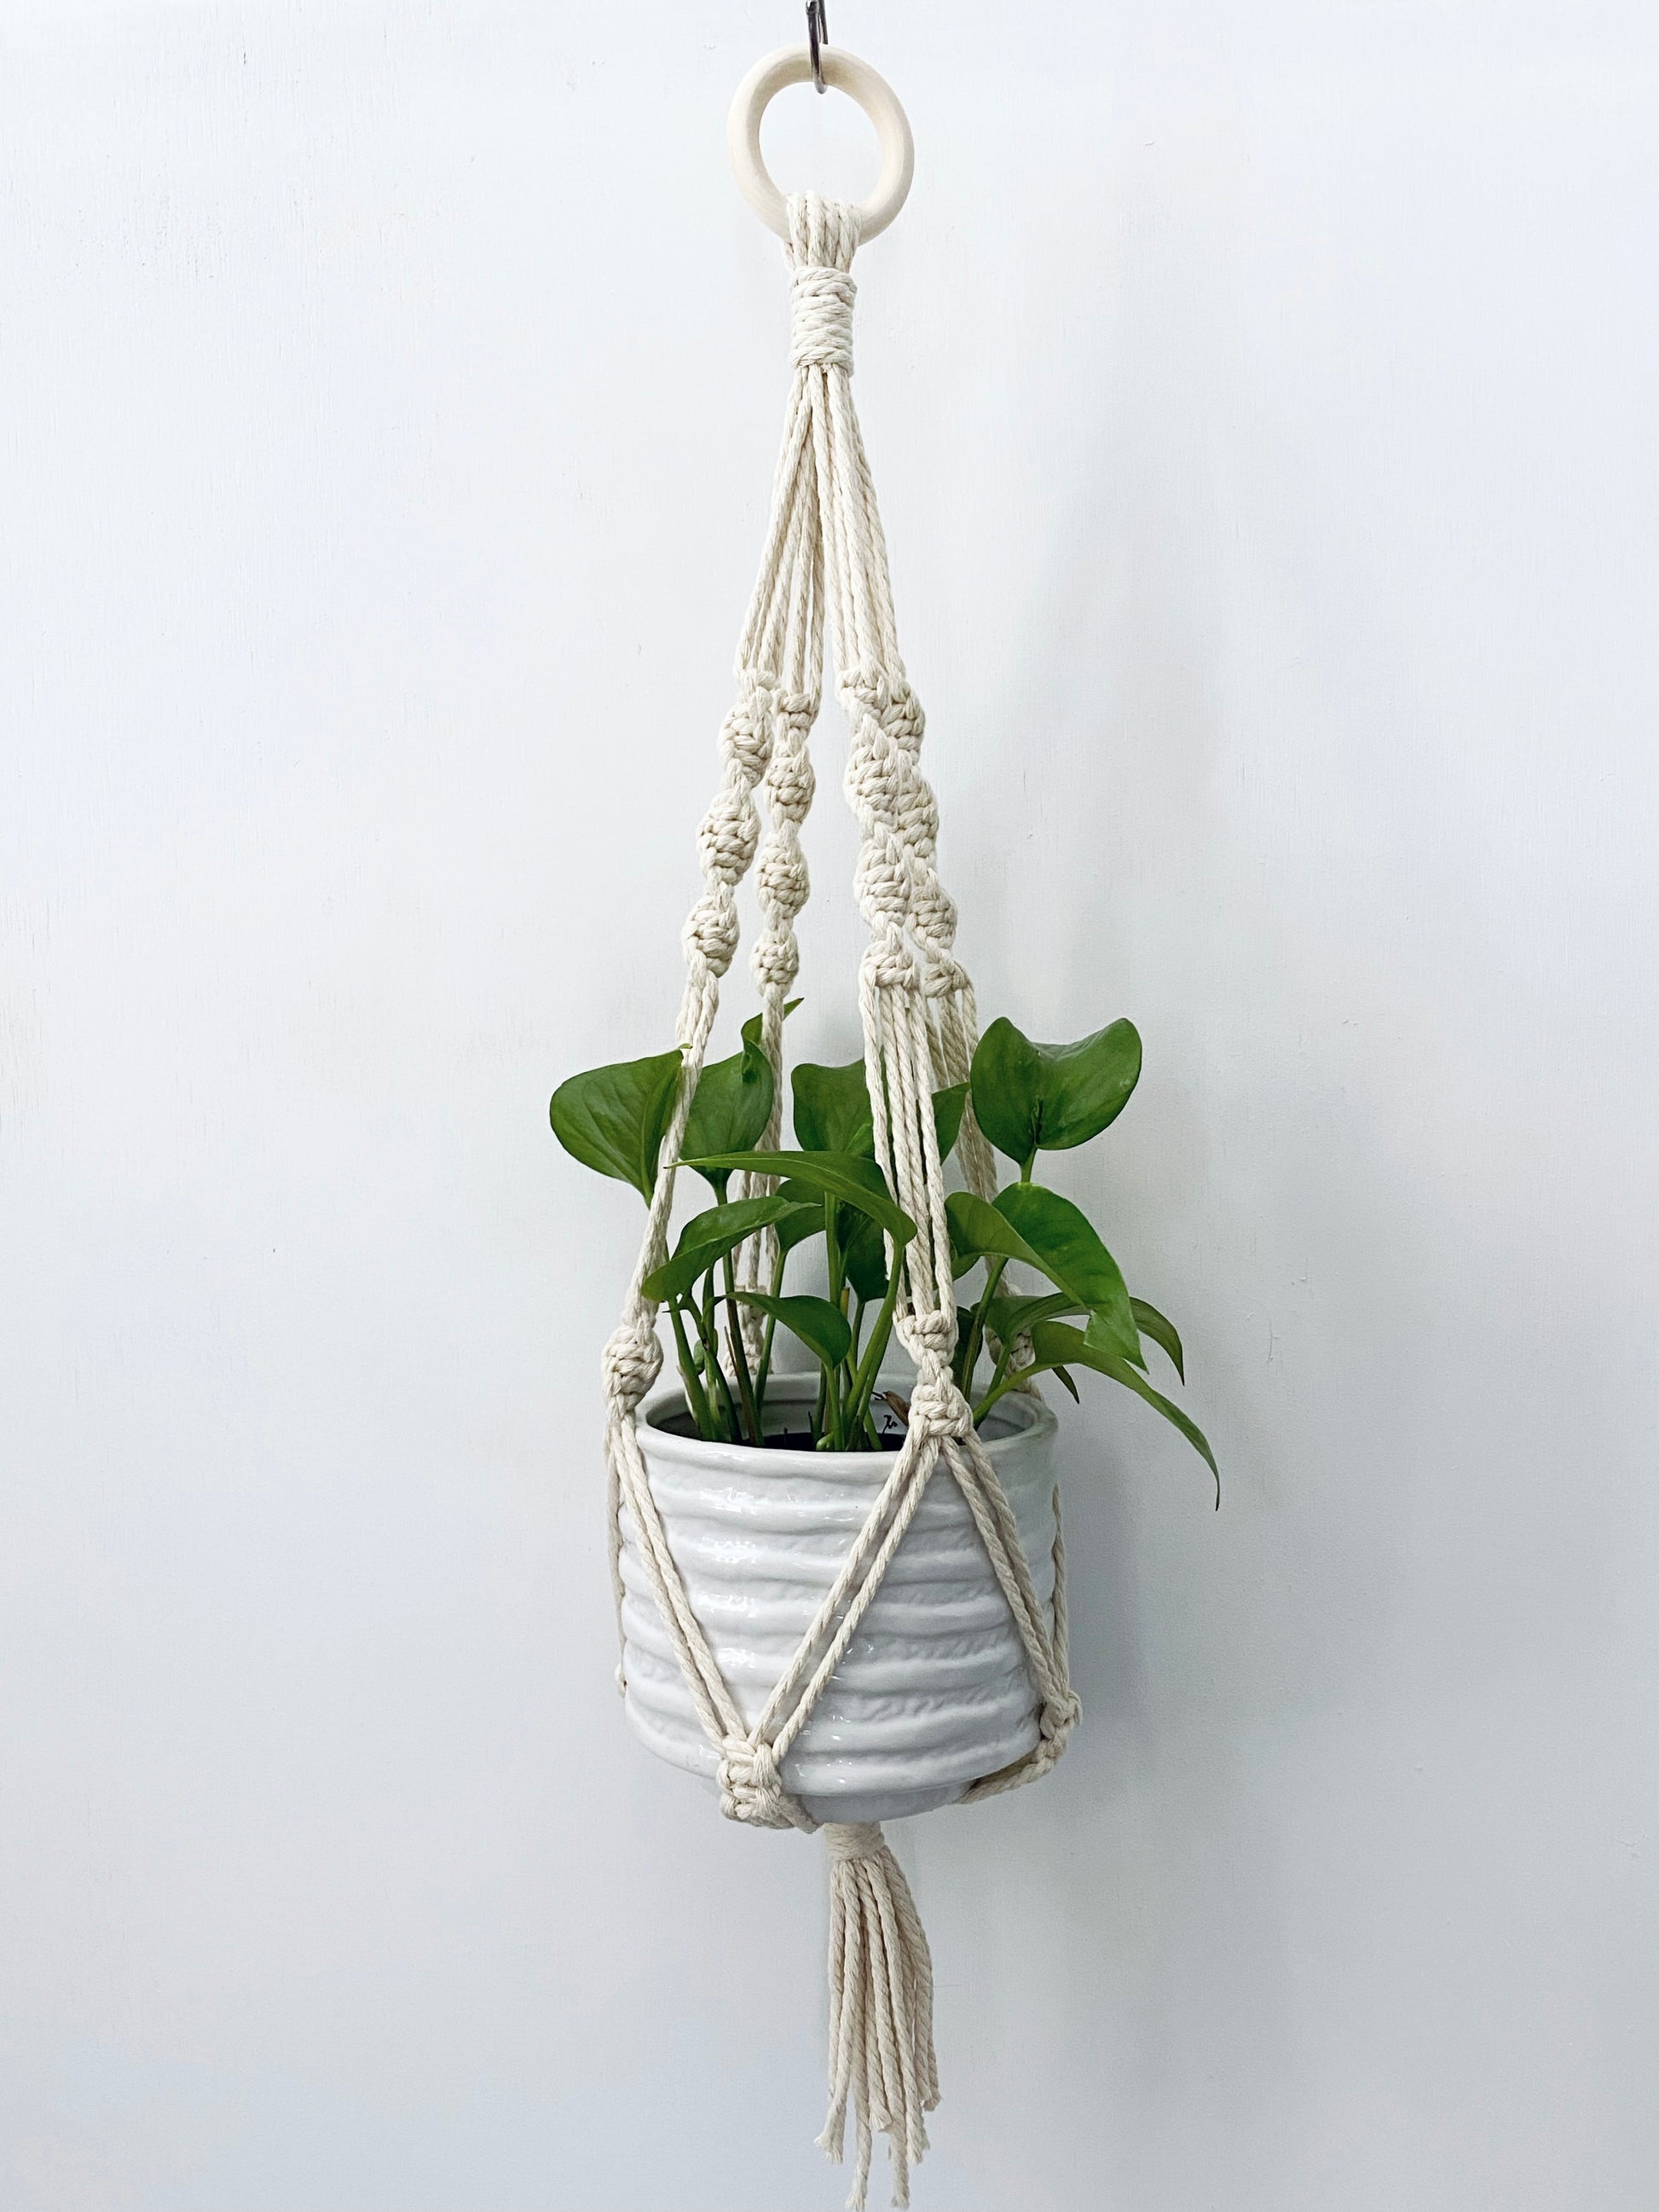 macraming Macrame Plant Hanger Kit - Make 3 DIY Macromay Plant Holders Easy Projects for Beginners - Video Instruction Include - 100m (109yrd) 3mm